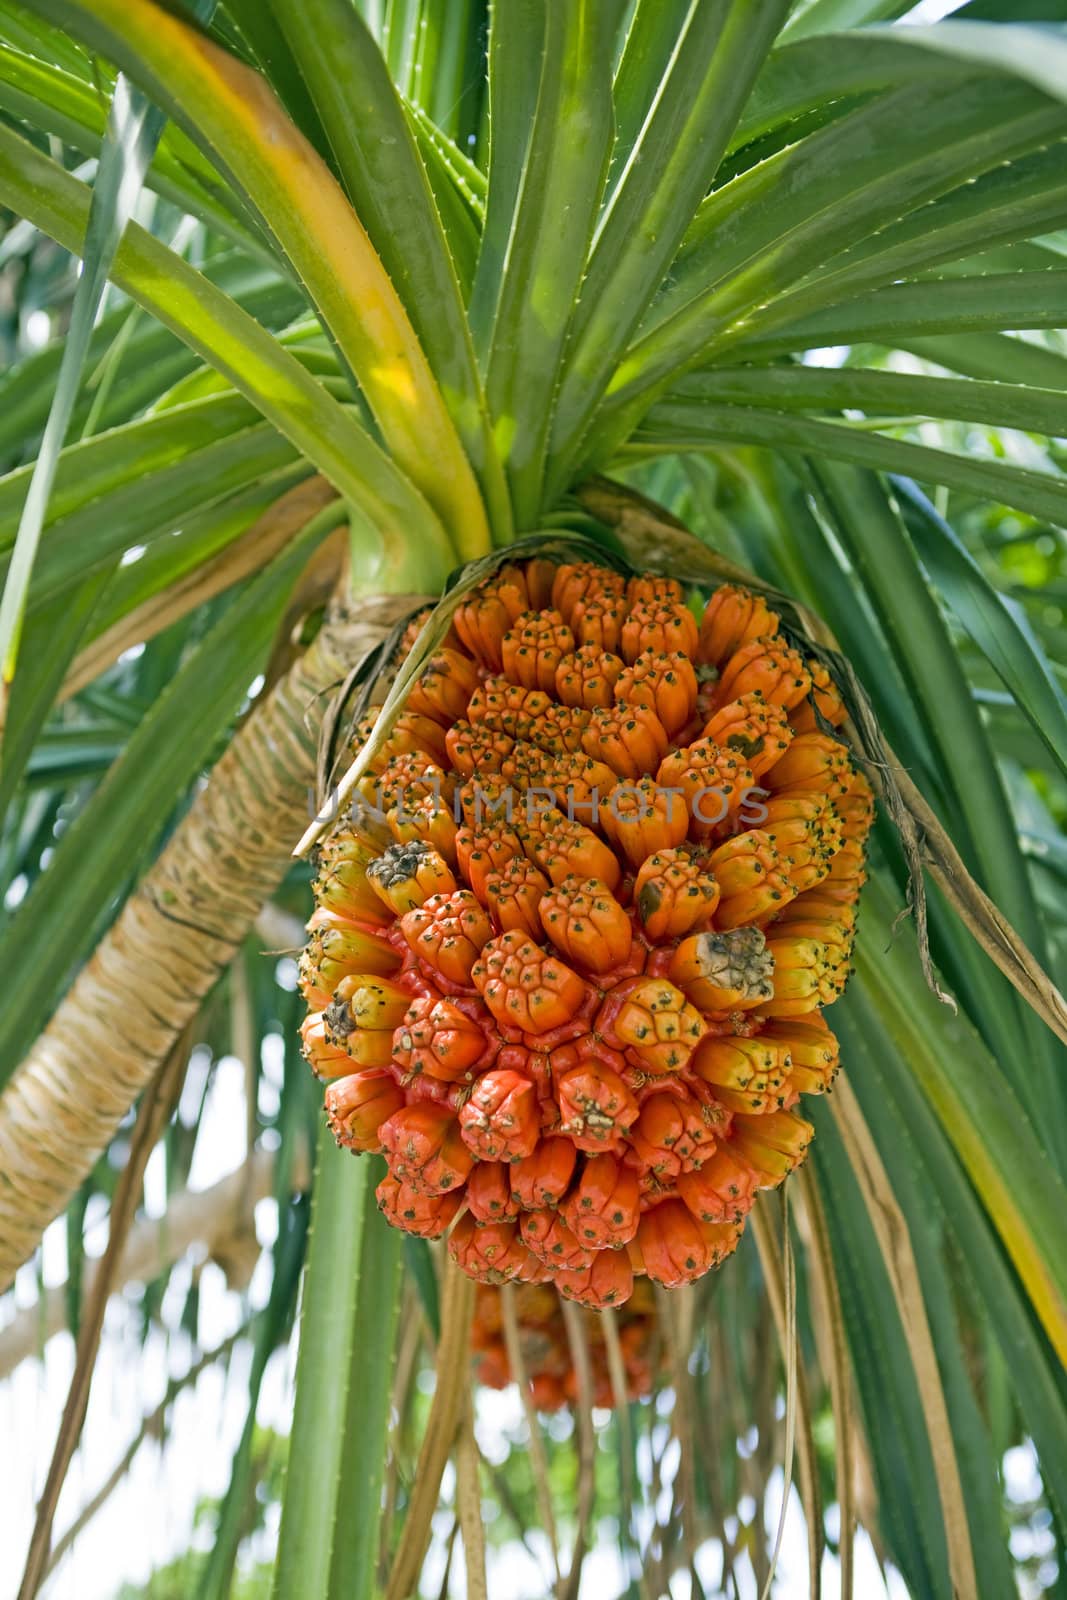 Orange, ripe pandanus fruit, also screw-pine, hanging from a tree ripe and ready for harvest. Above are its green, saw-tooth leaves.